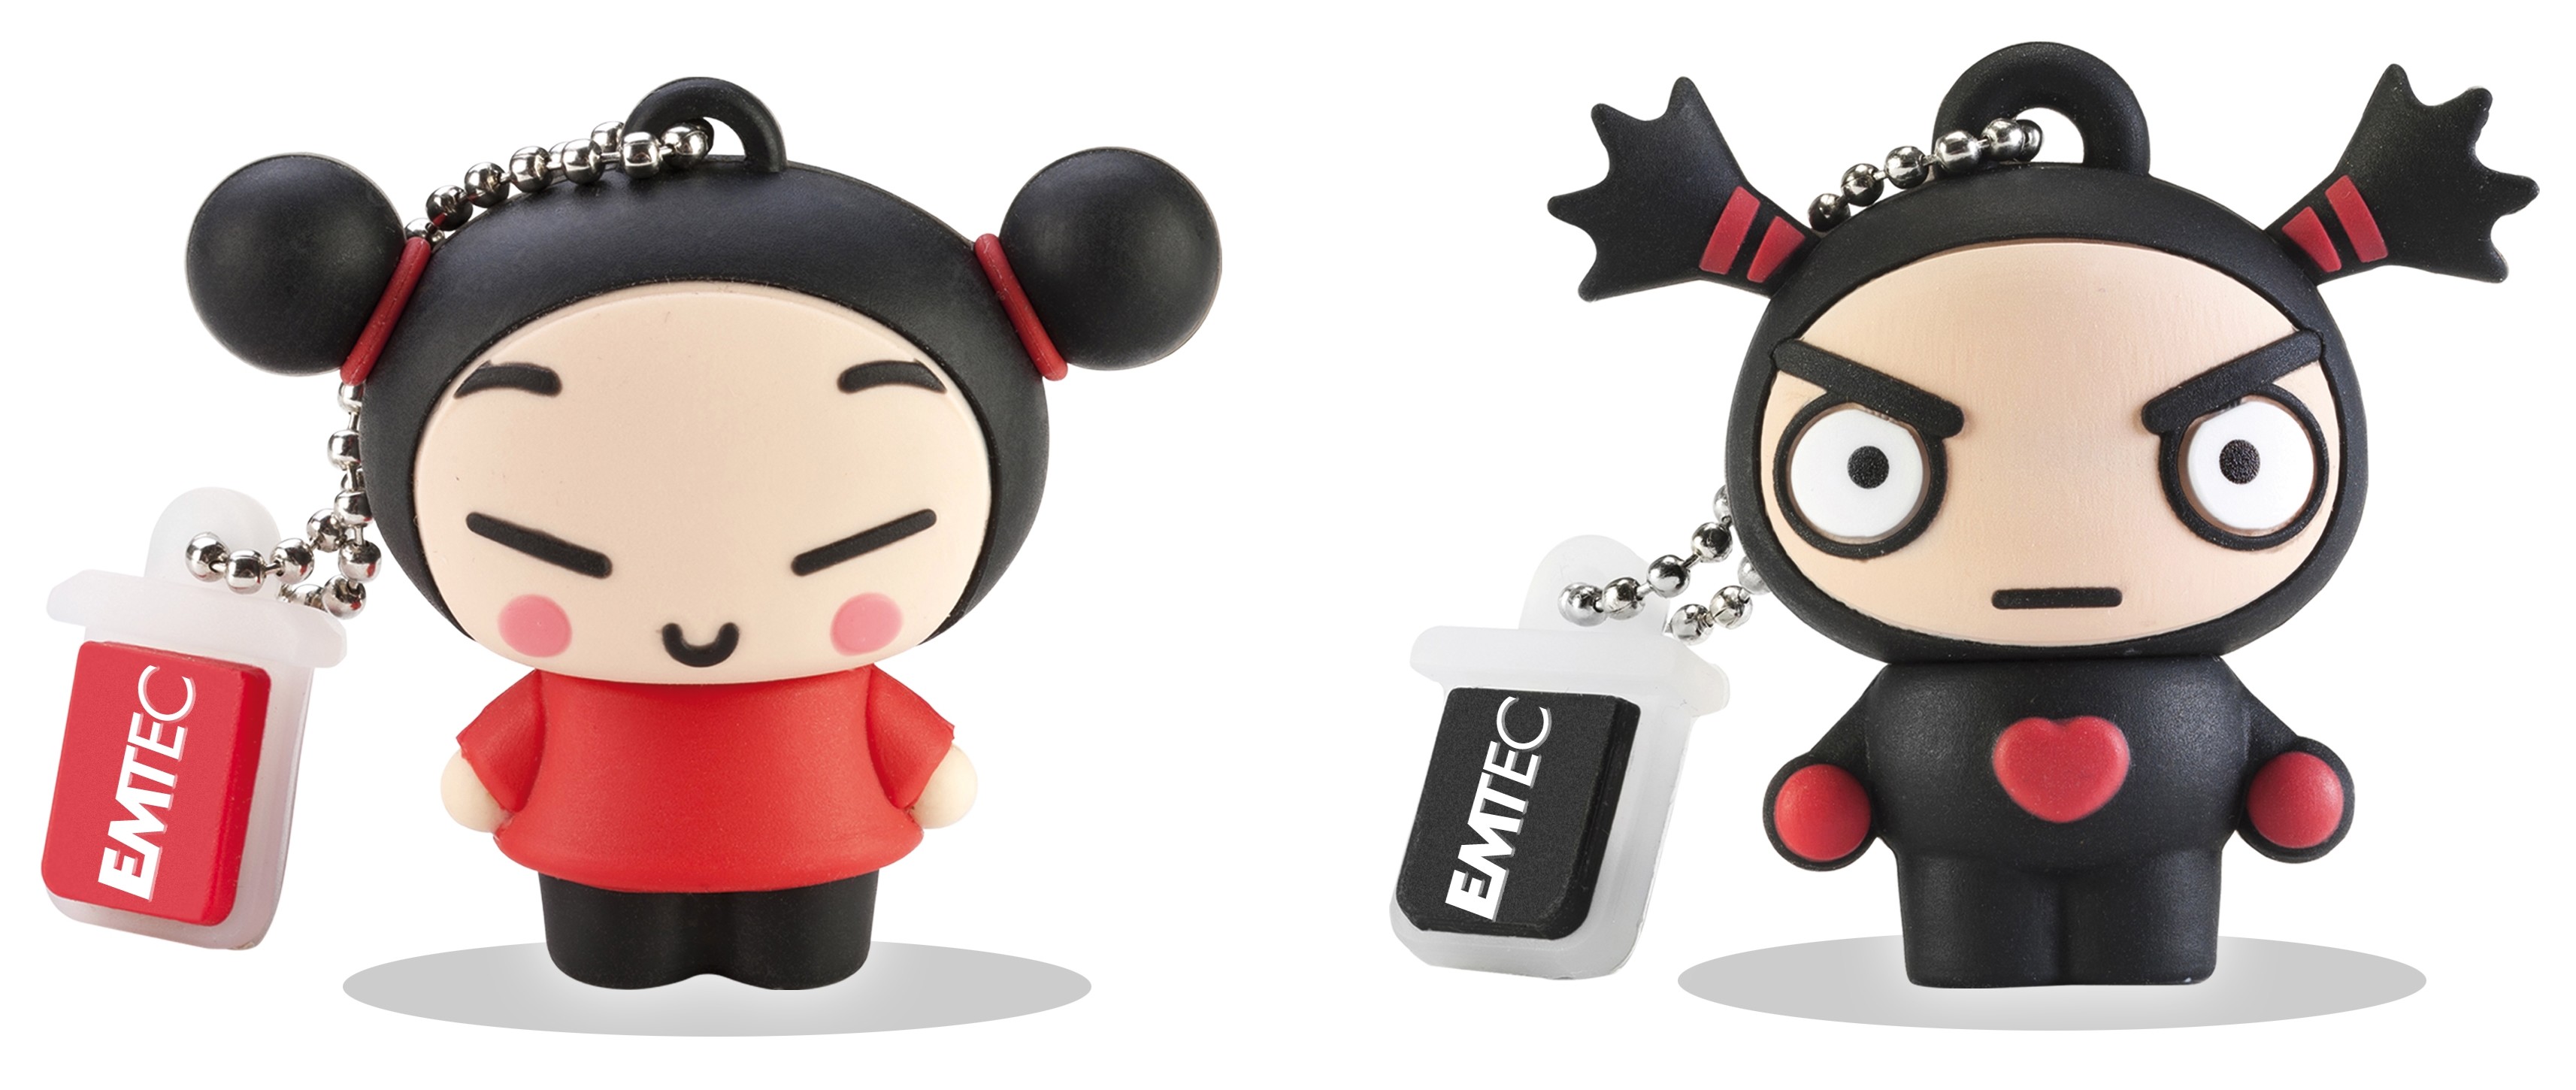 3427x1450 ... 99 ) pucca and garu | Tumblr Oh my god I LOVED Pucca!